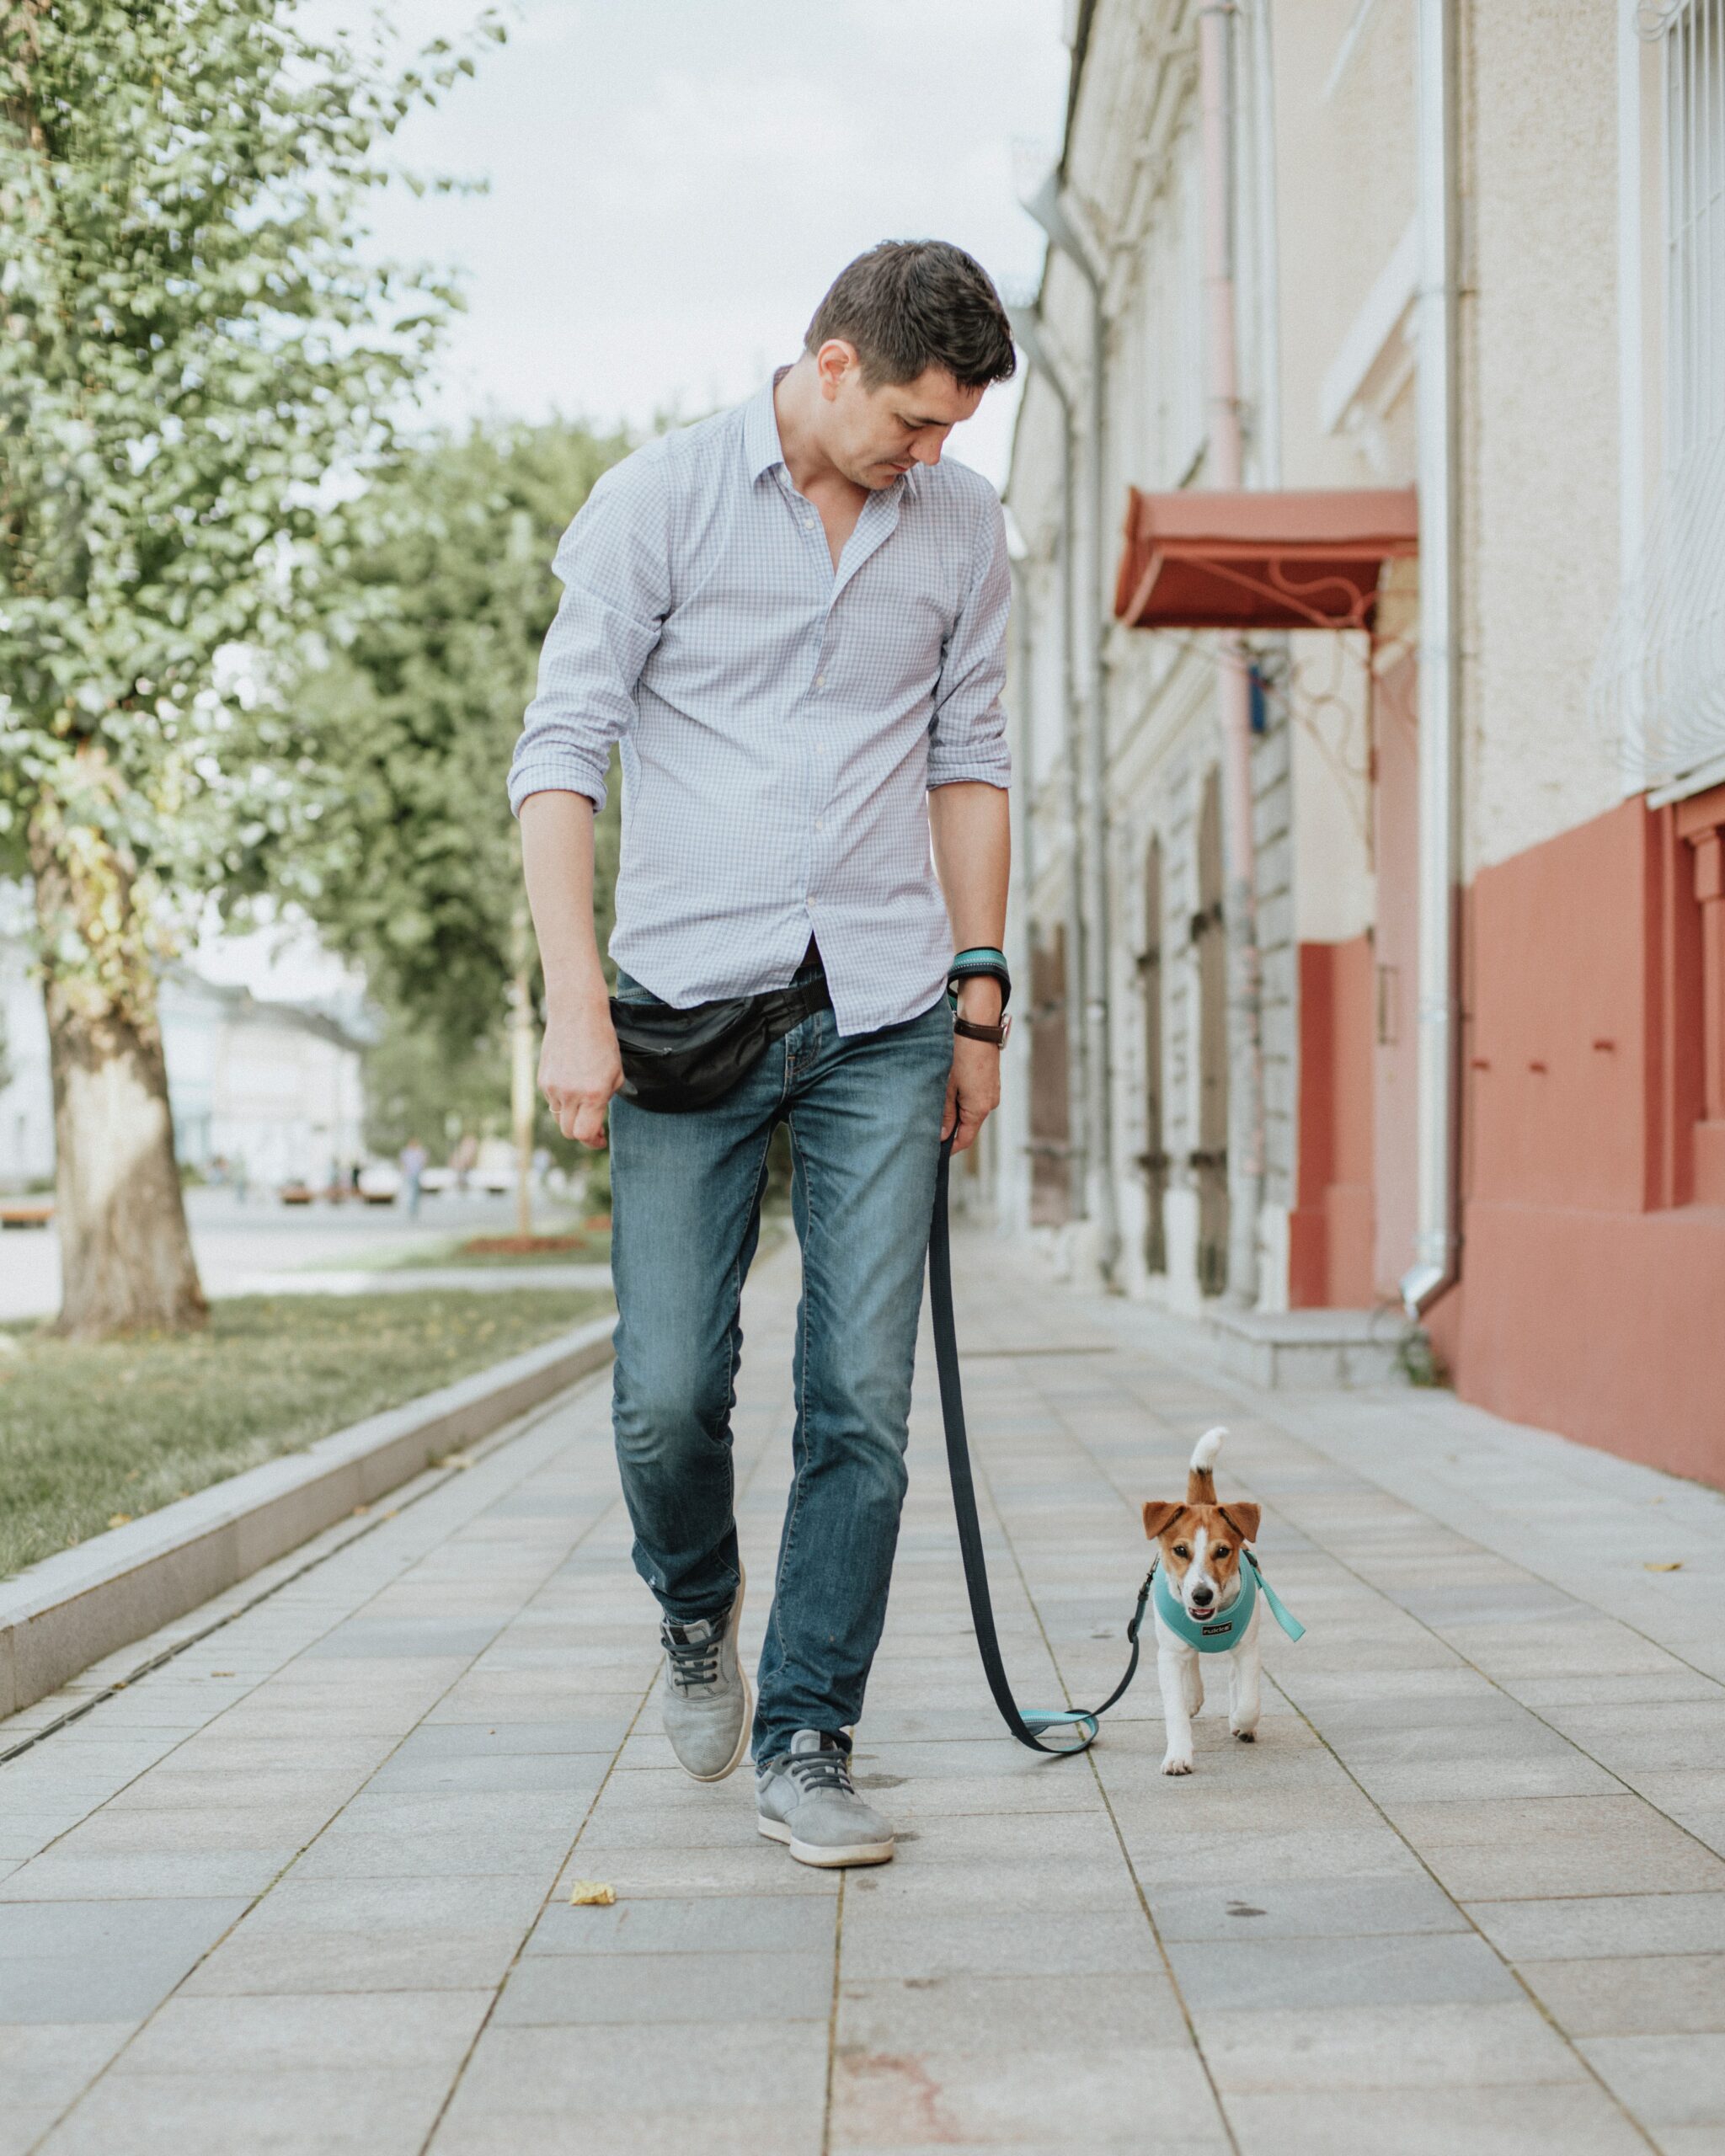 5 Tips You Must Know While Walking Dogs